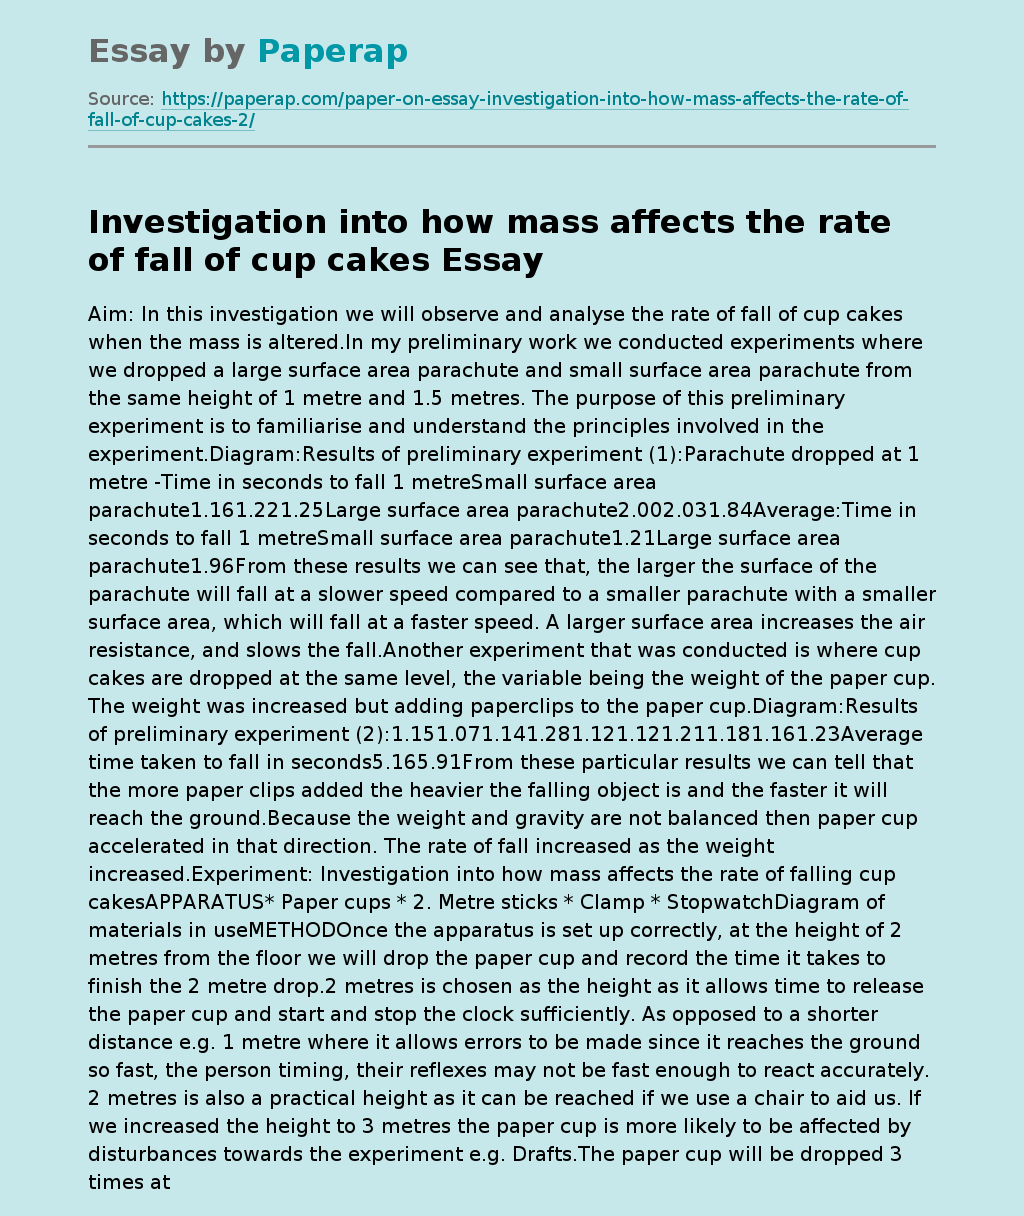 Investigation Into How mass Affects the Rate of Fall of Cup Cakes